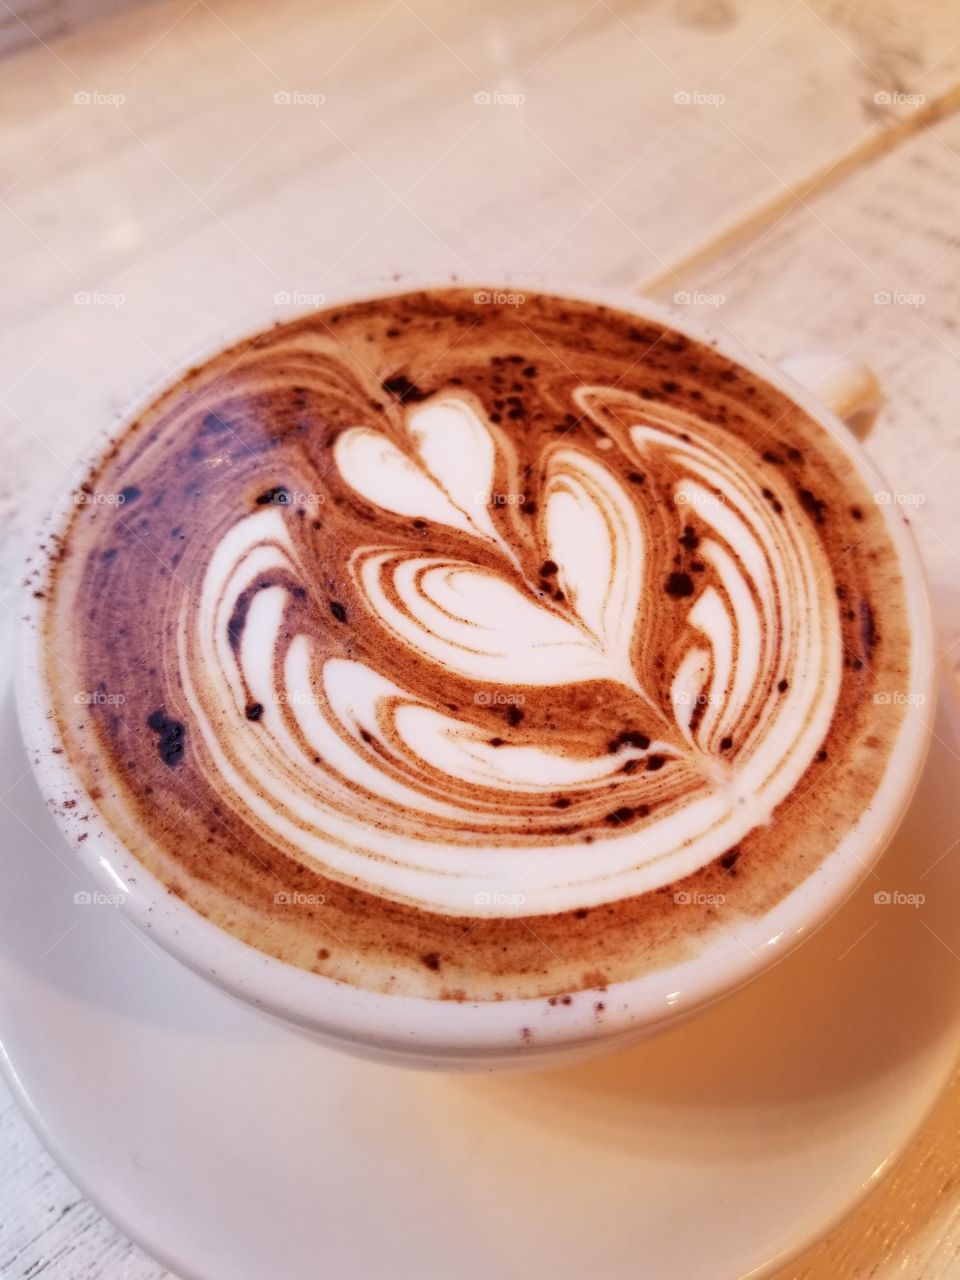 Mocha from Chouette Cafe Torrefacteur in Setagaya. The lightning gave it a rose colored perspective.